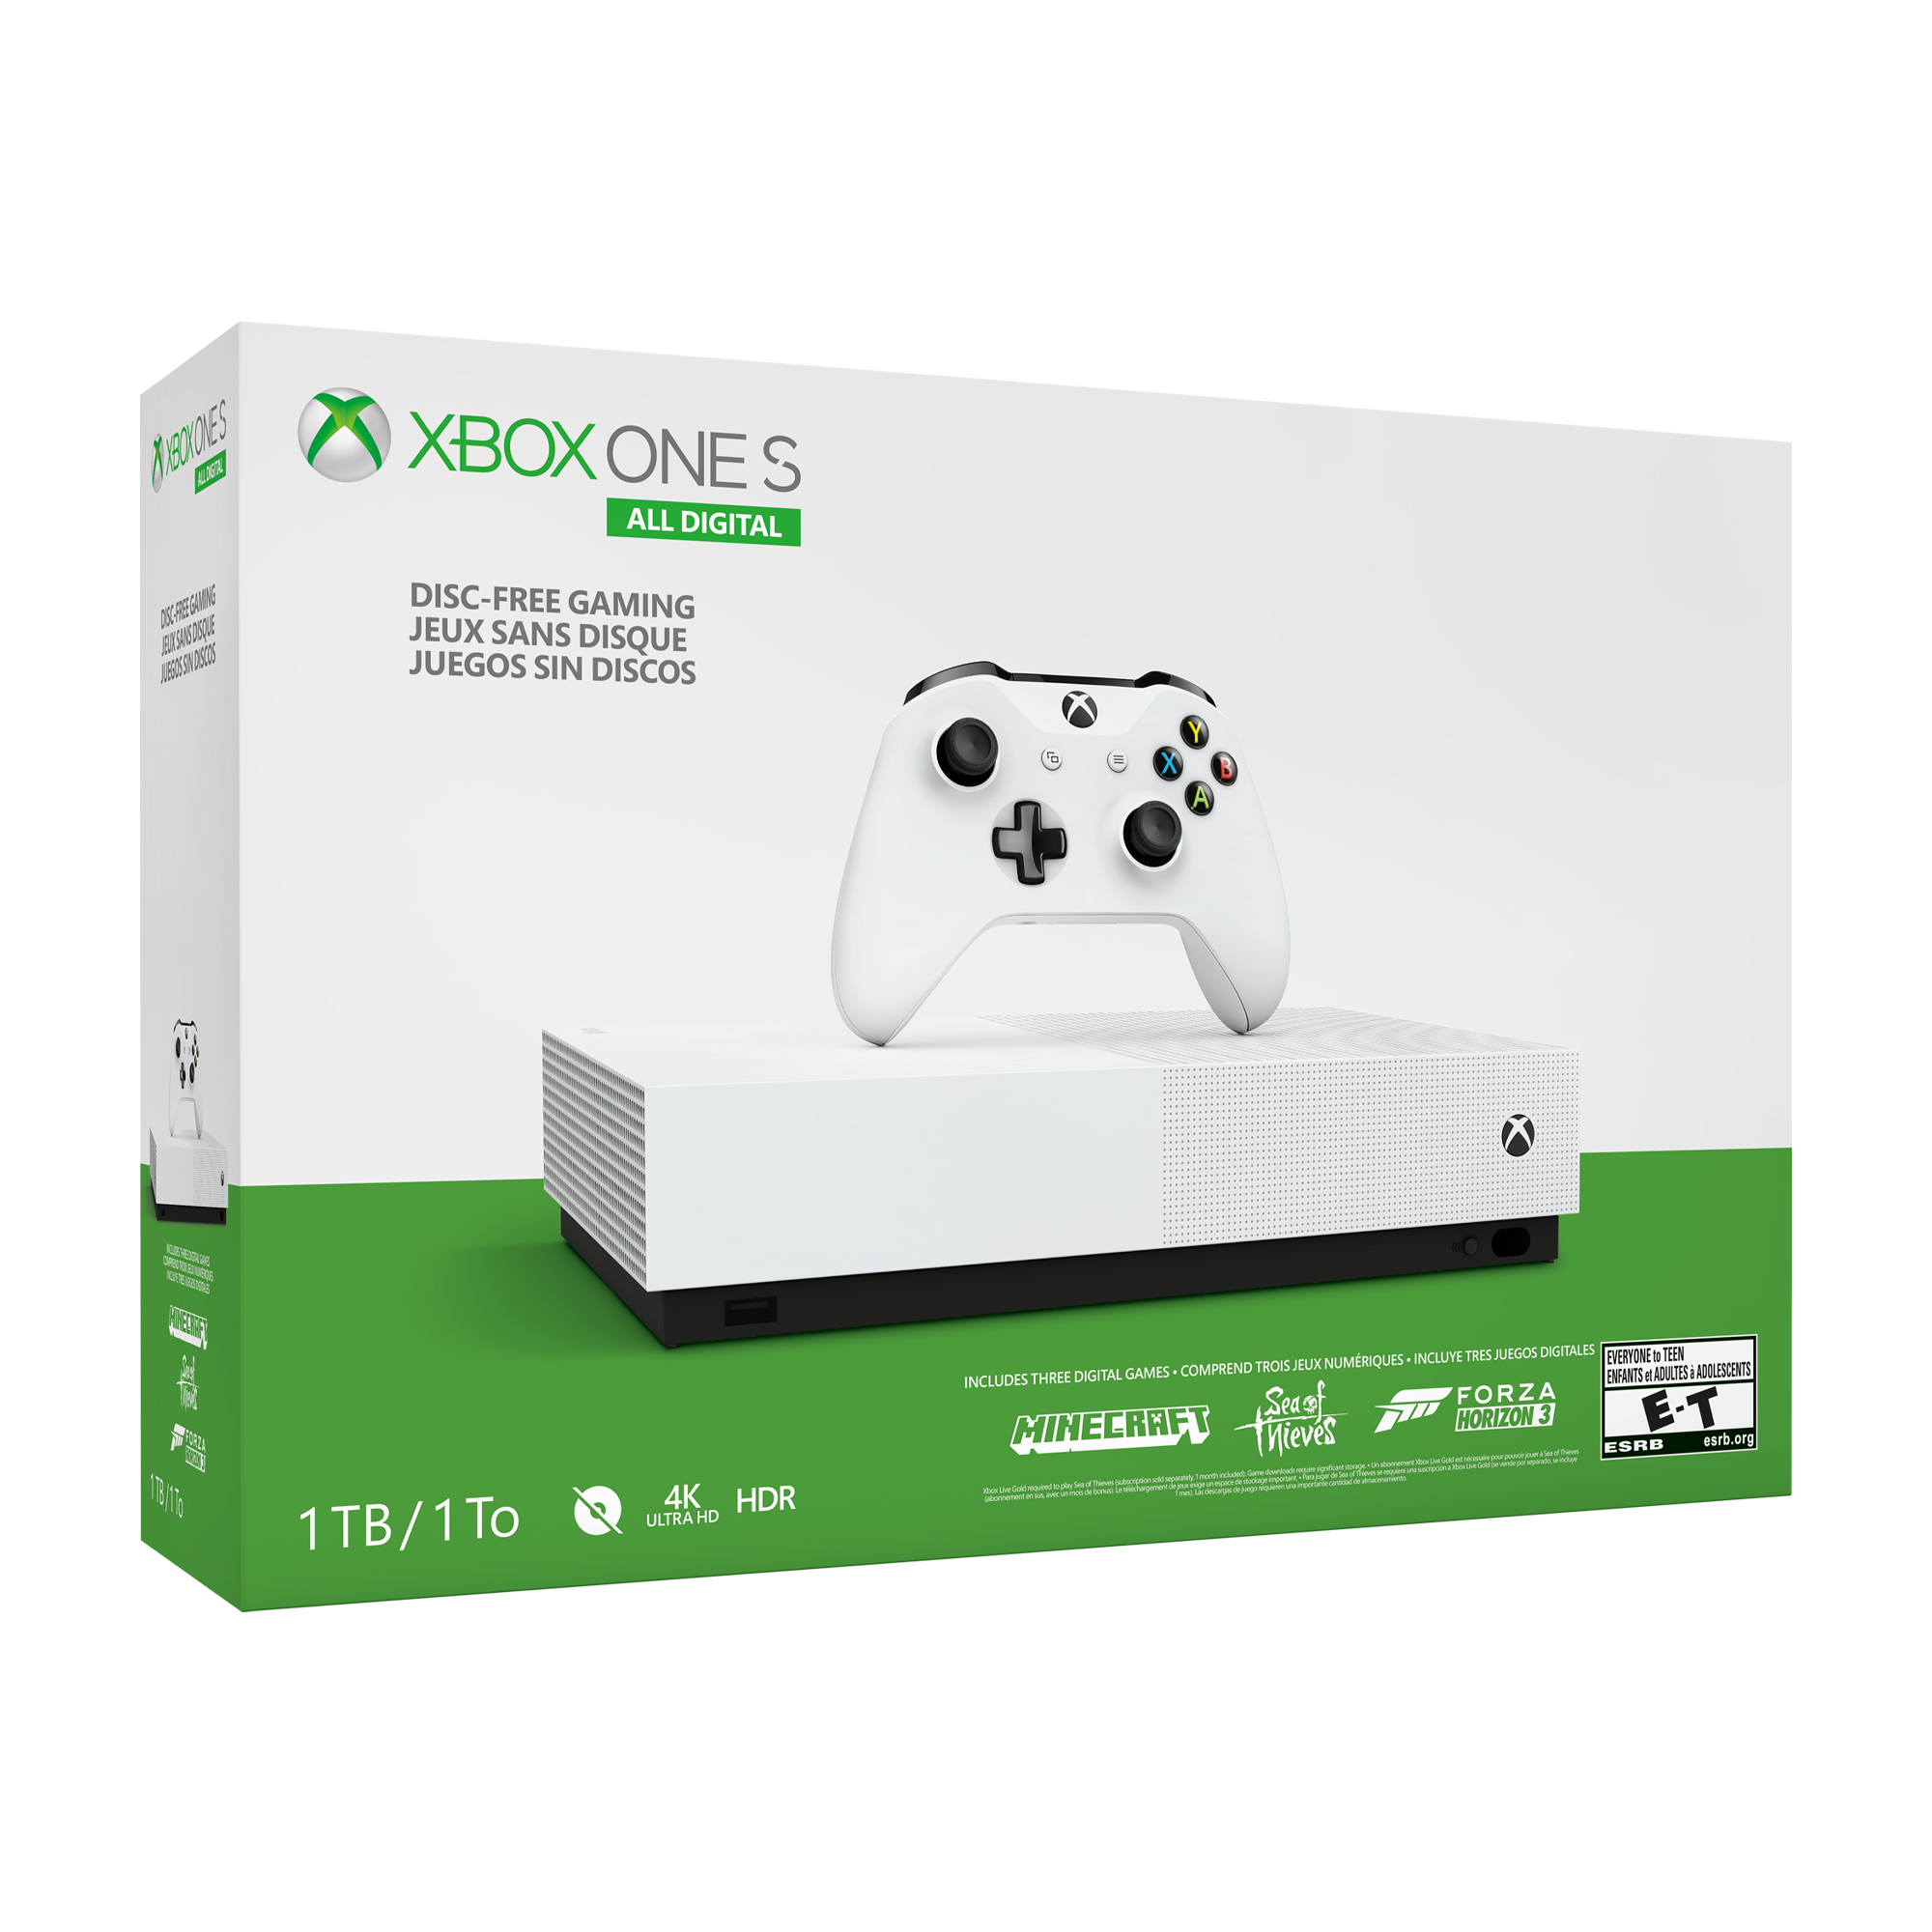 Microsoft Xbox One S 1TB All-Digital Edition Console (Disc-free Gaming), White, NJP-00024